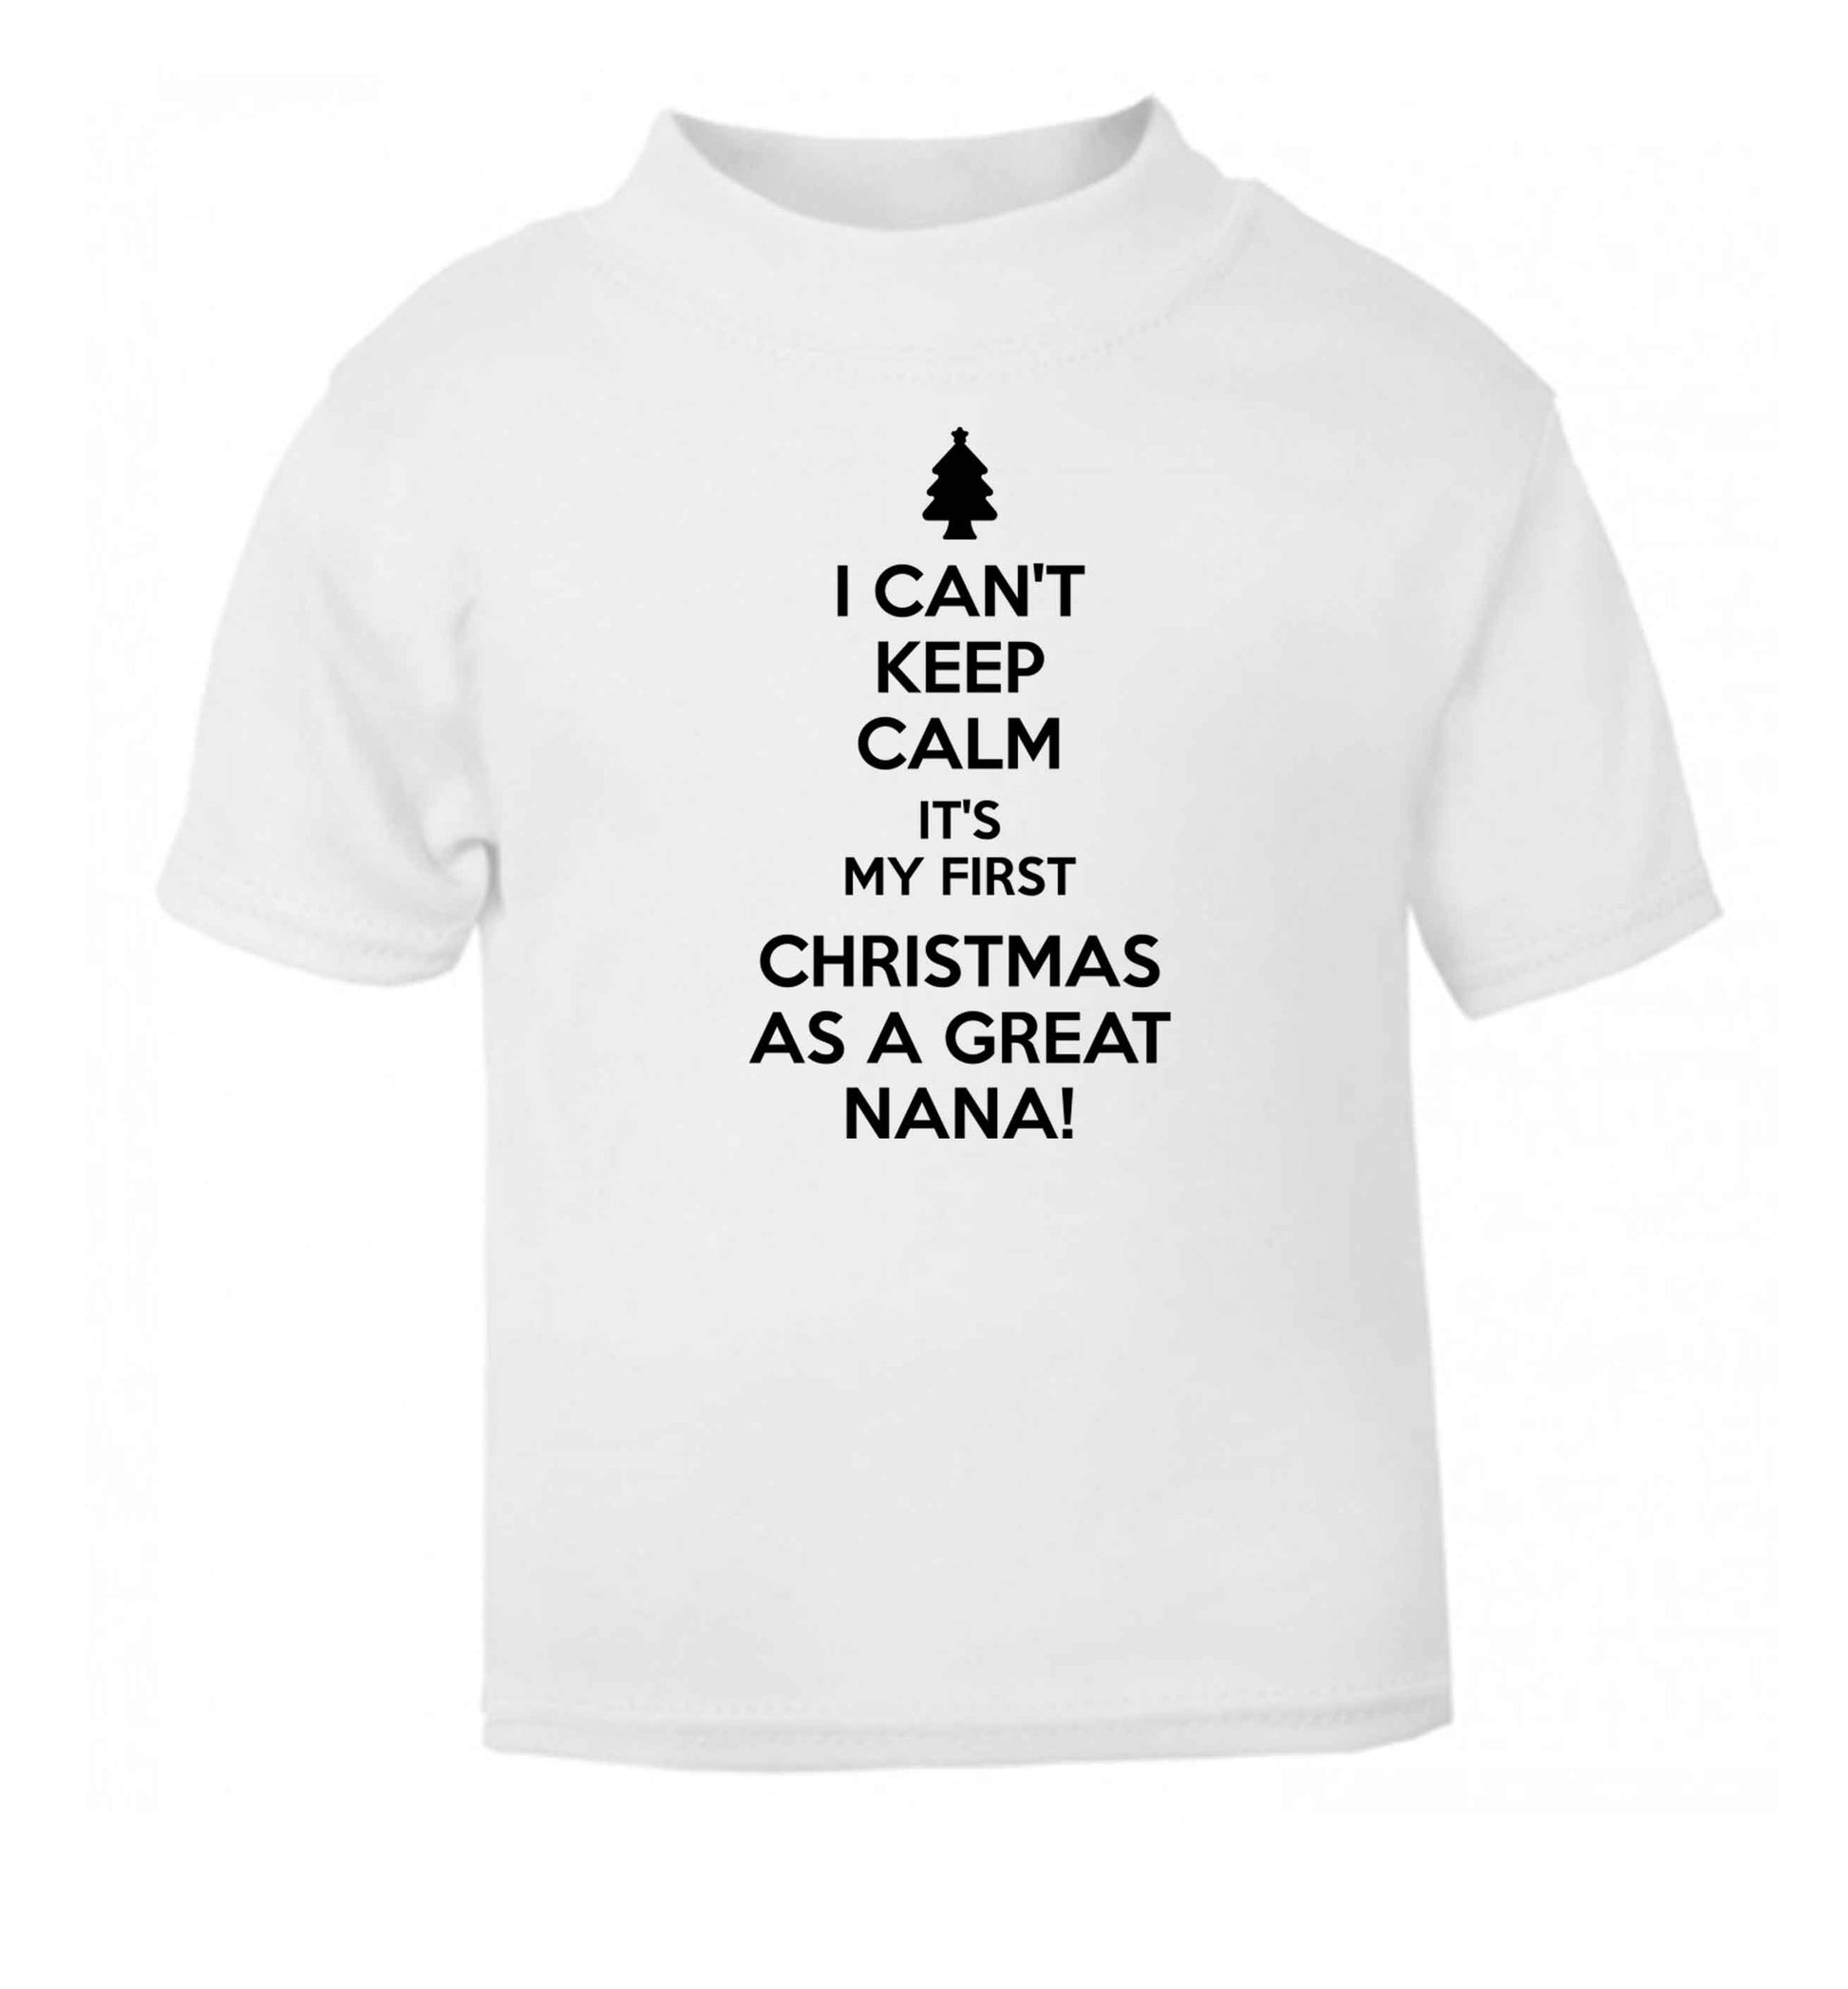 I can't keep calm it's my first Christmas as a great nana! white Baby Toddler Tshirt 2 Years